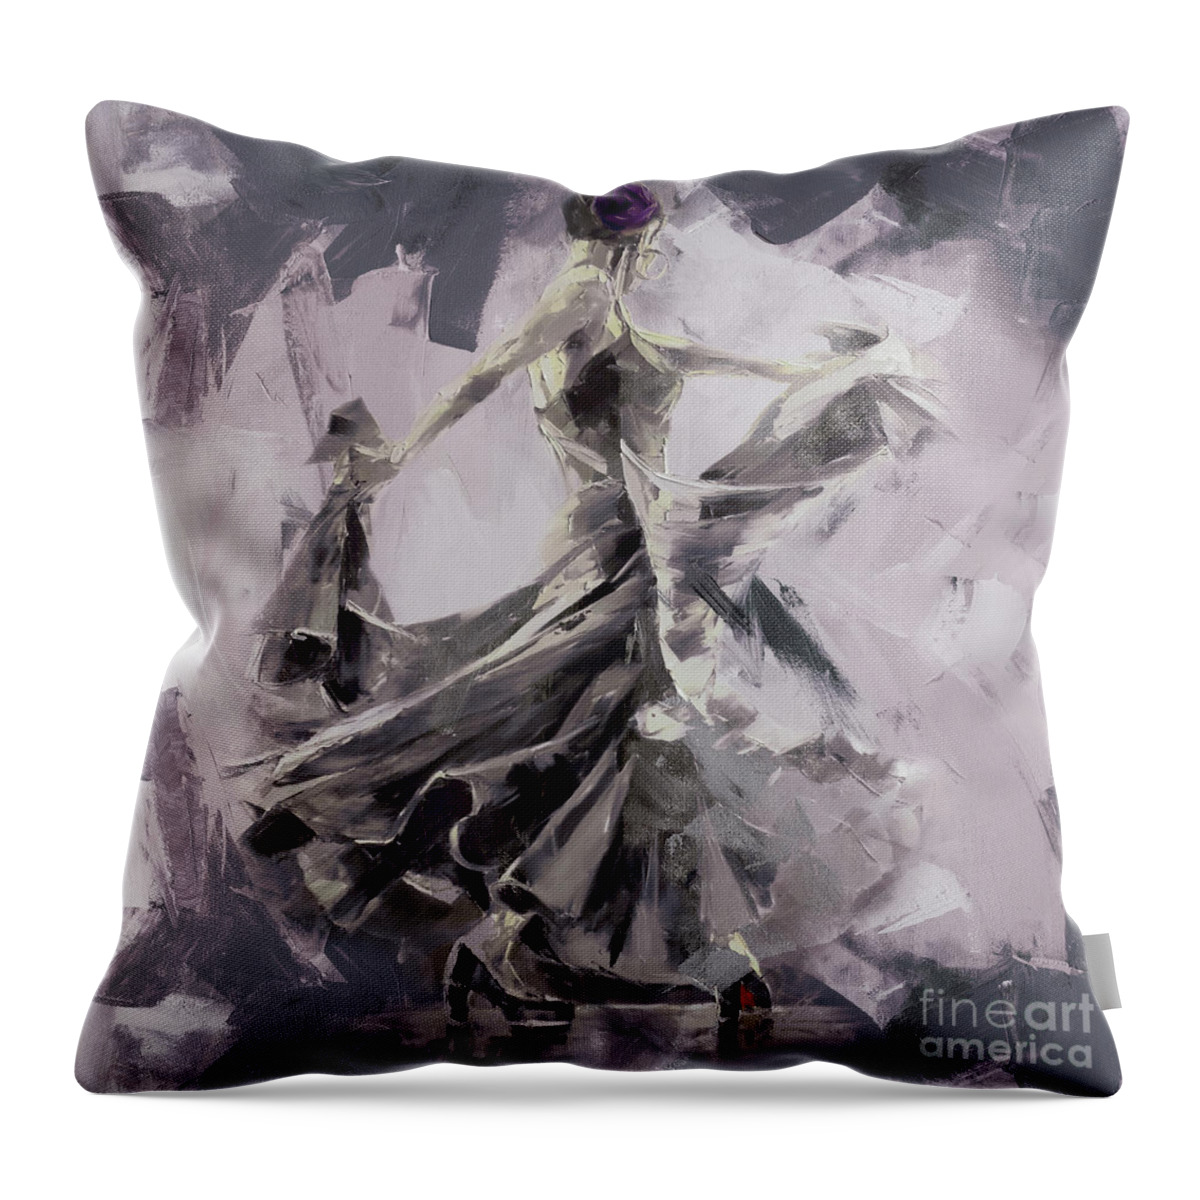 Jazz Throw Pillow featuring the painting Spanish Dance Painting 03 by Gull G